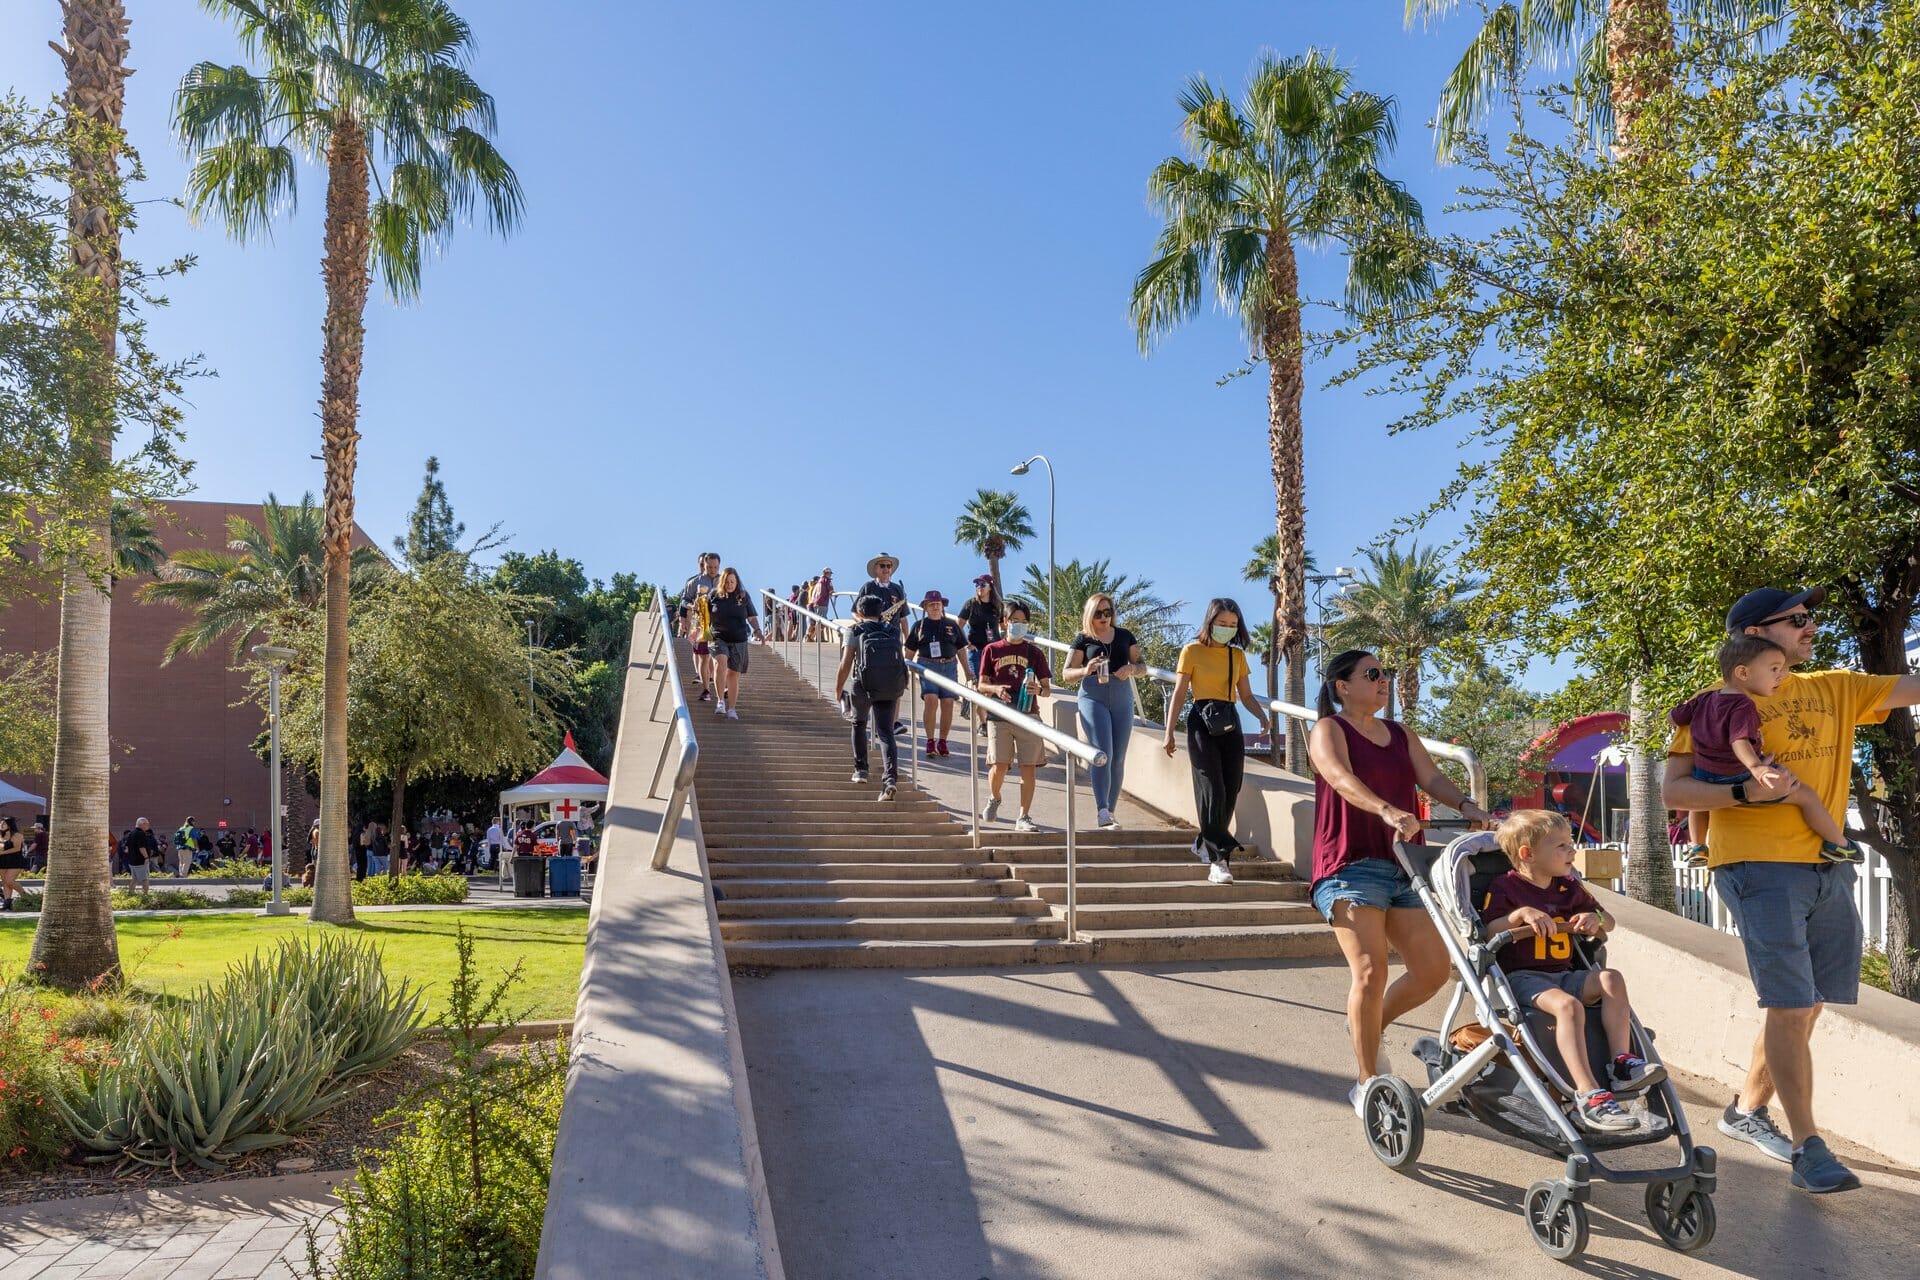 Families with strollers and other groups of people walking down the ASU bridge